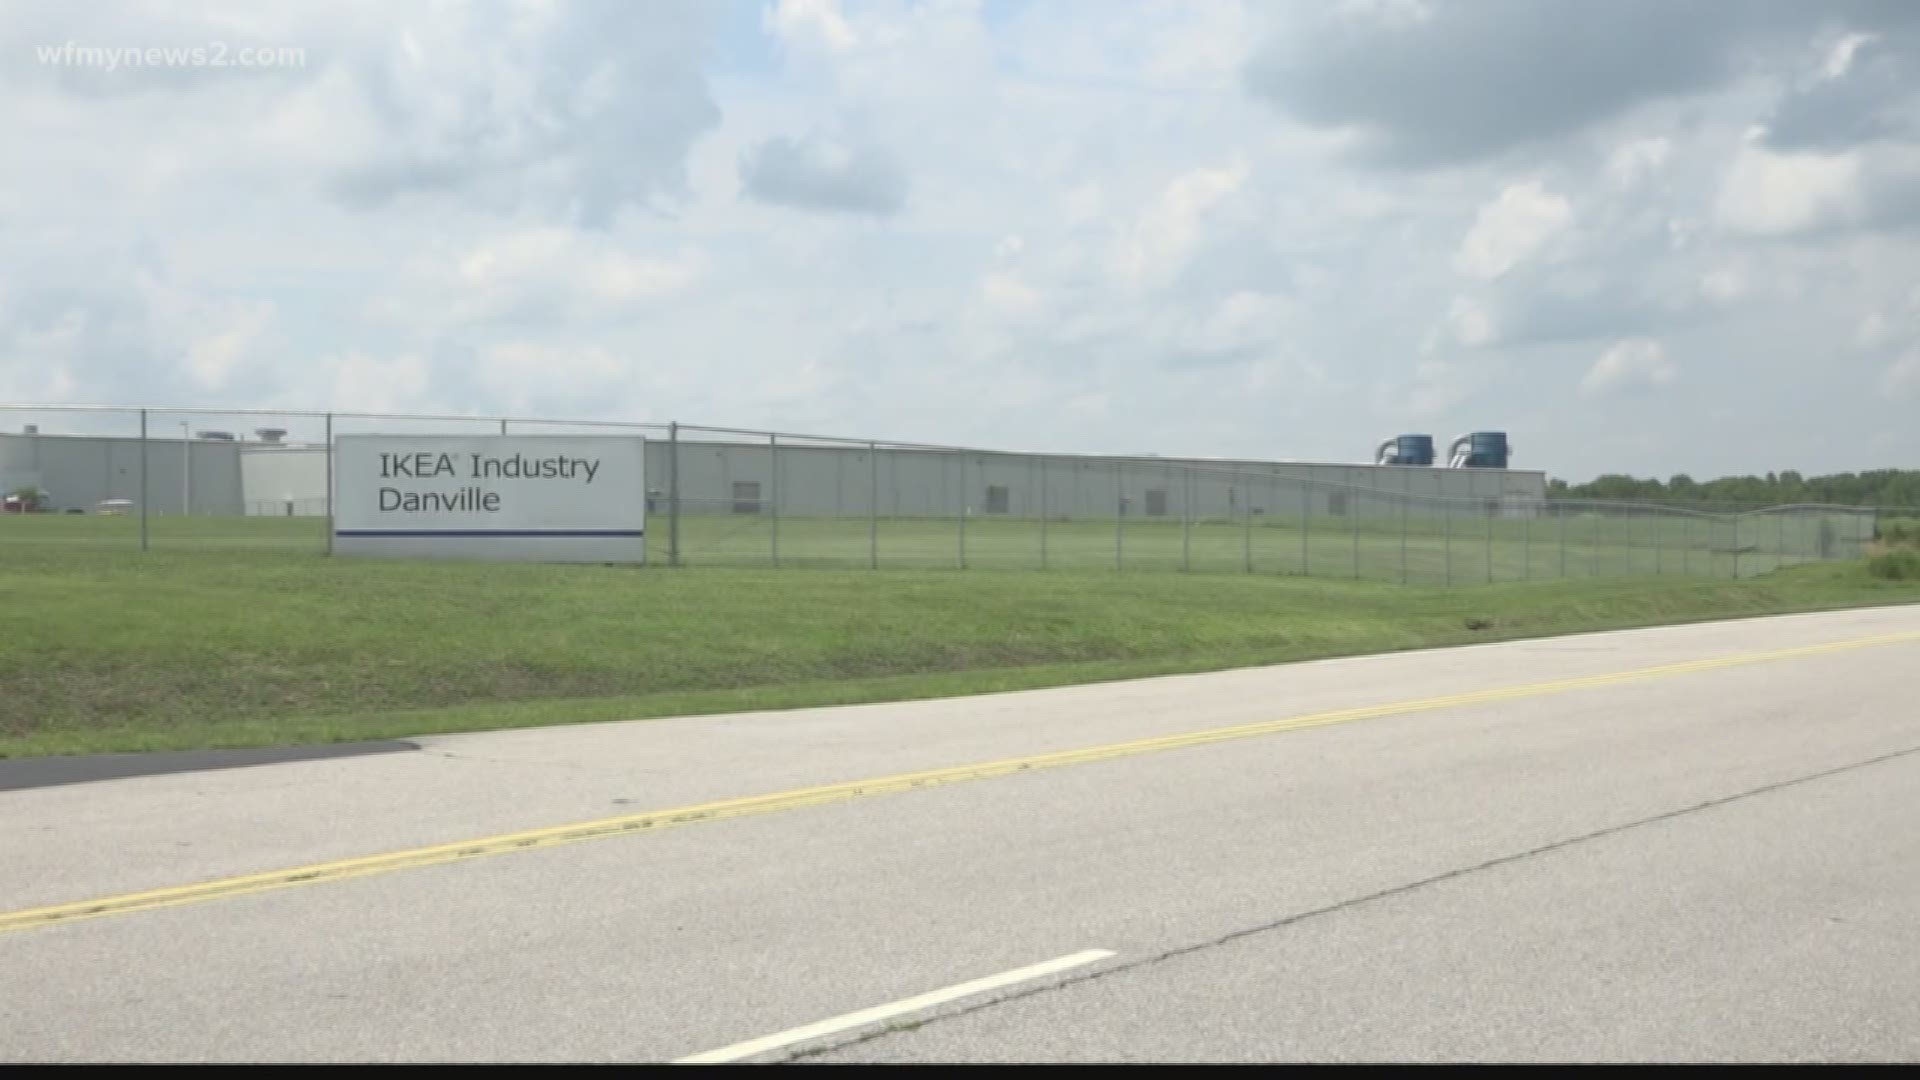 Currently, the plant employs 300 workers who will soon be impacted by the closing.